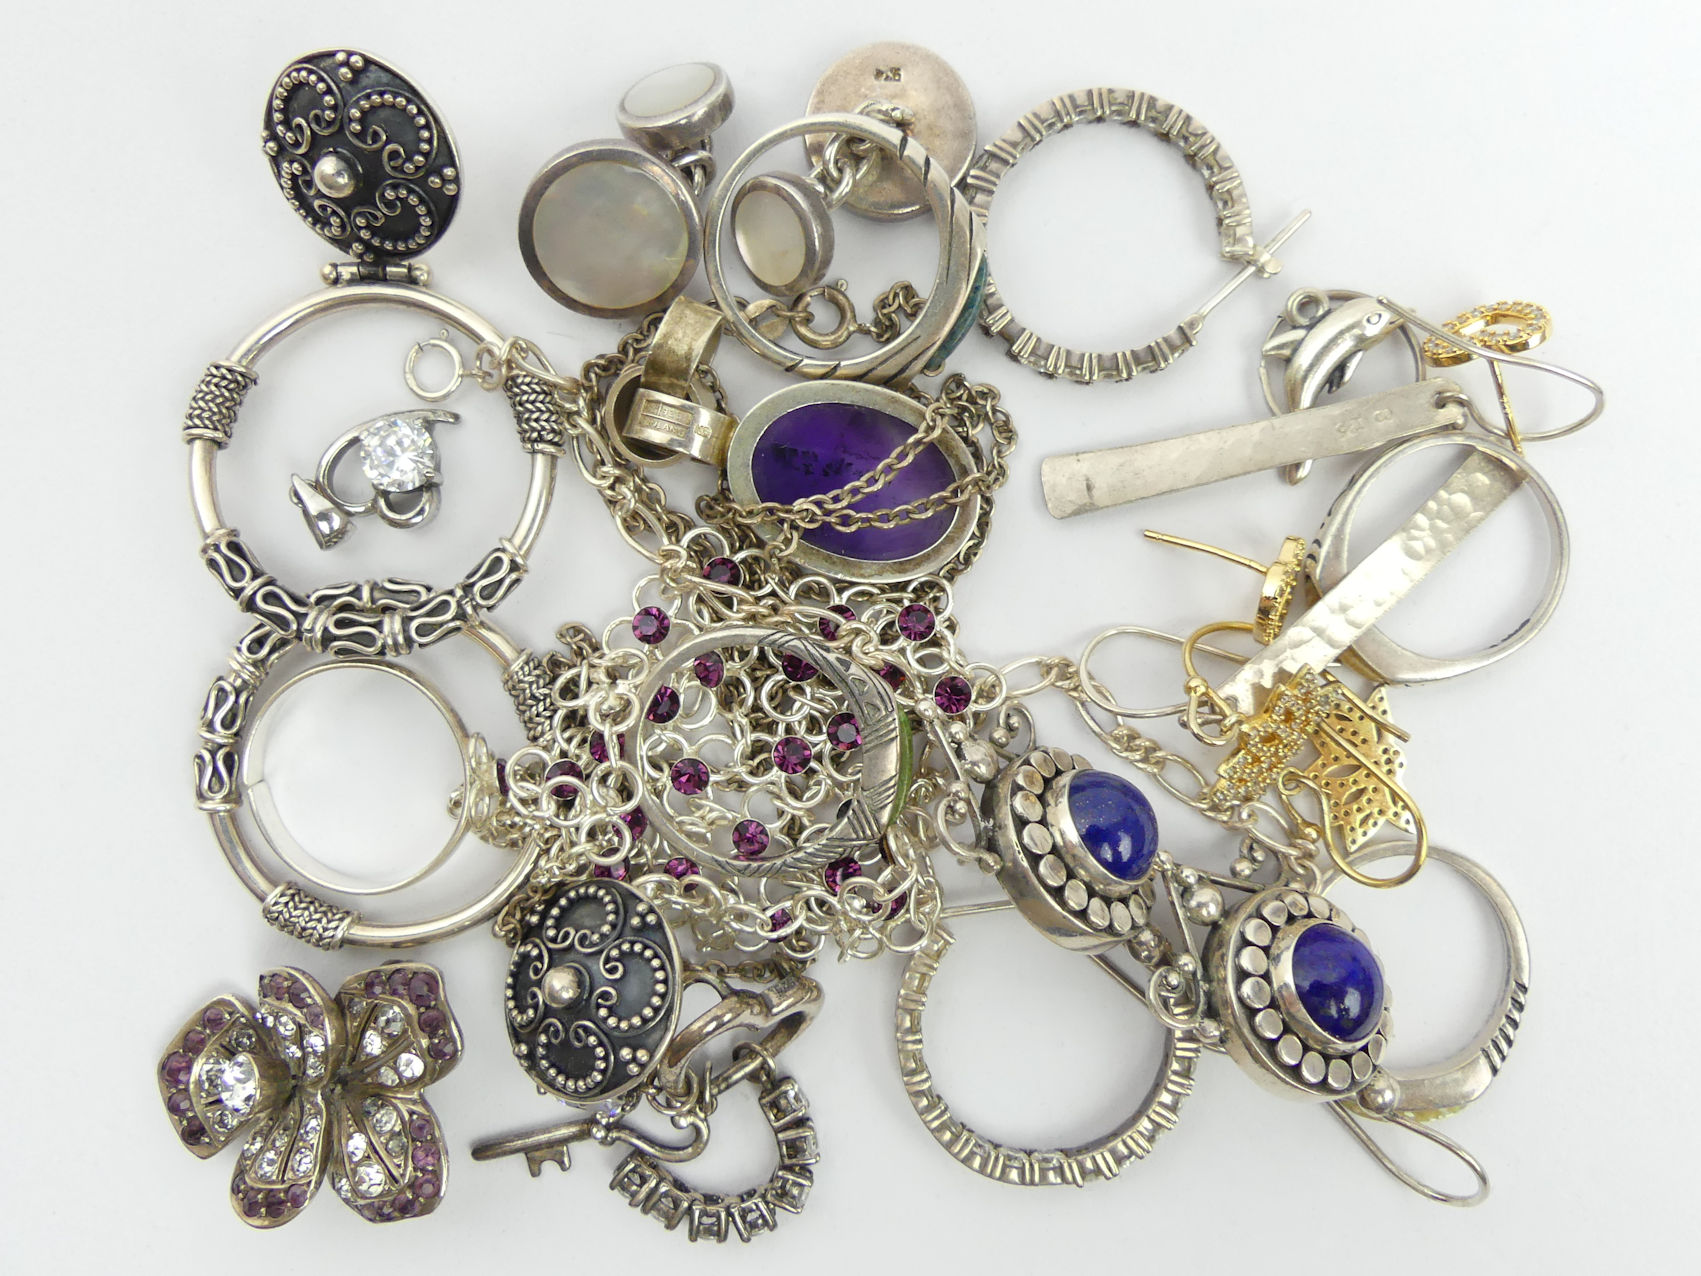 Various items of silver jewellery including rings, stone set pendants, ornate earrings and a stone